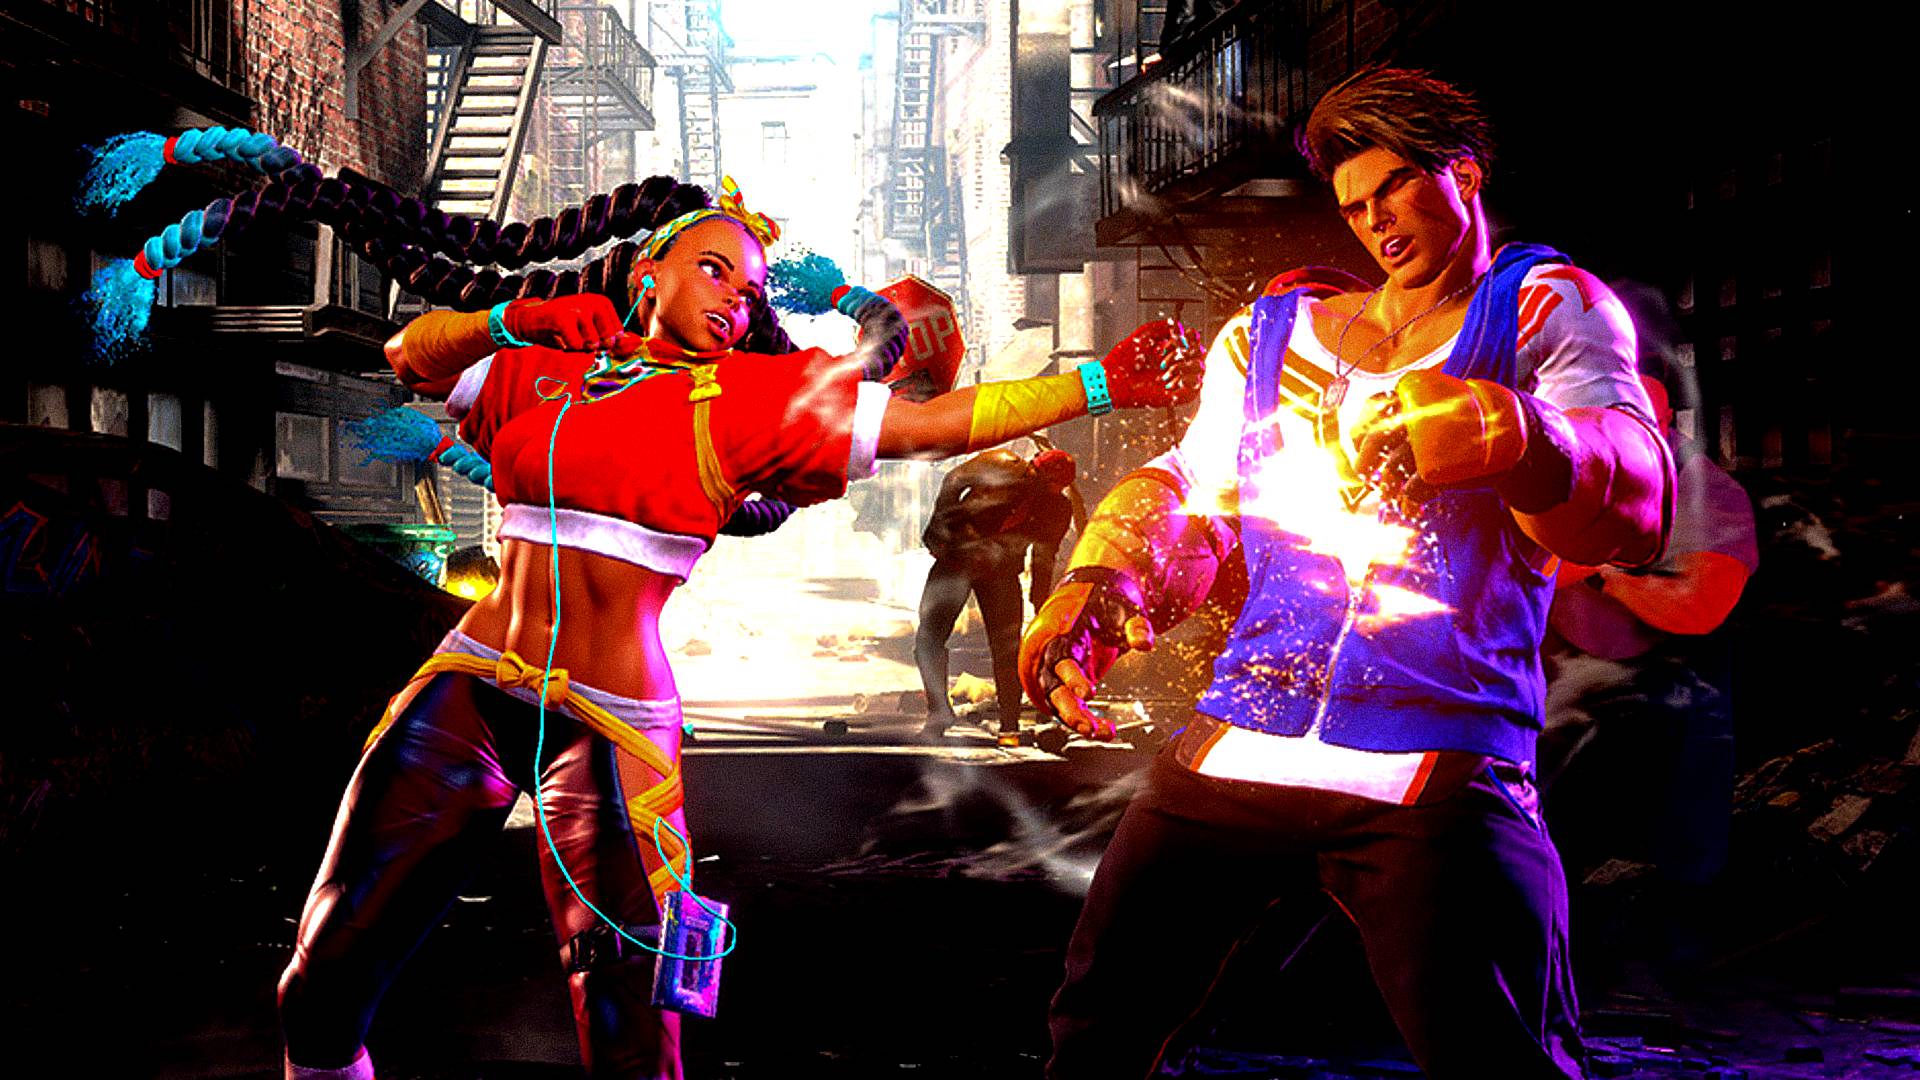 Street Fighter 6 Beta Test Coming Out Next Month - Gameranx